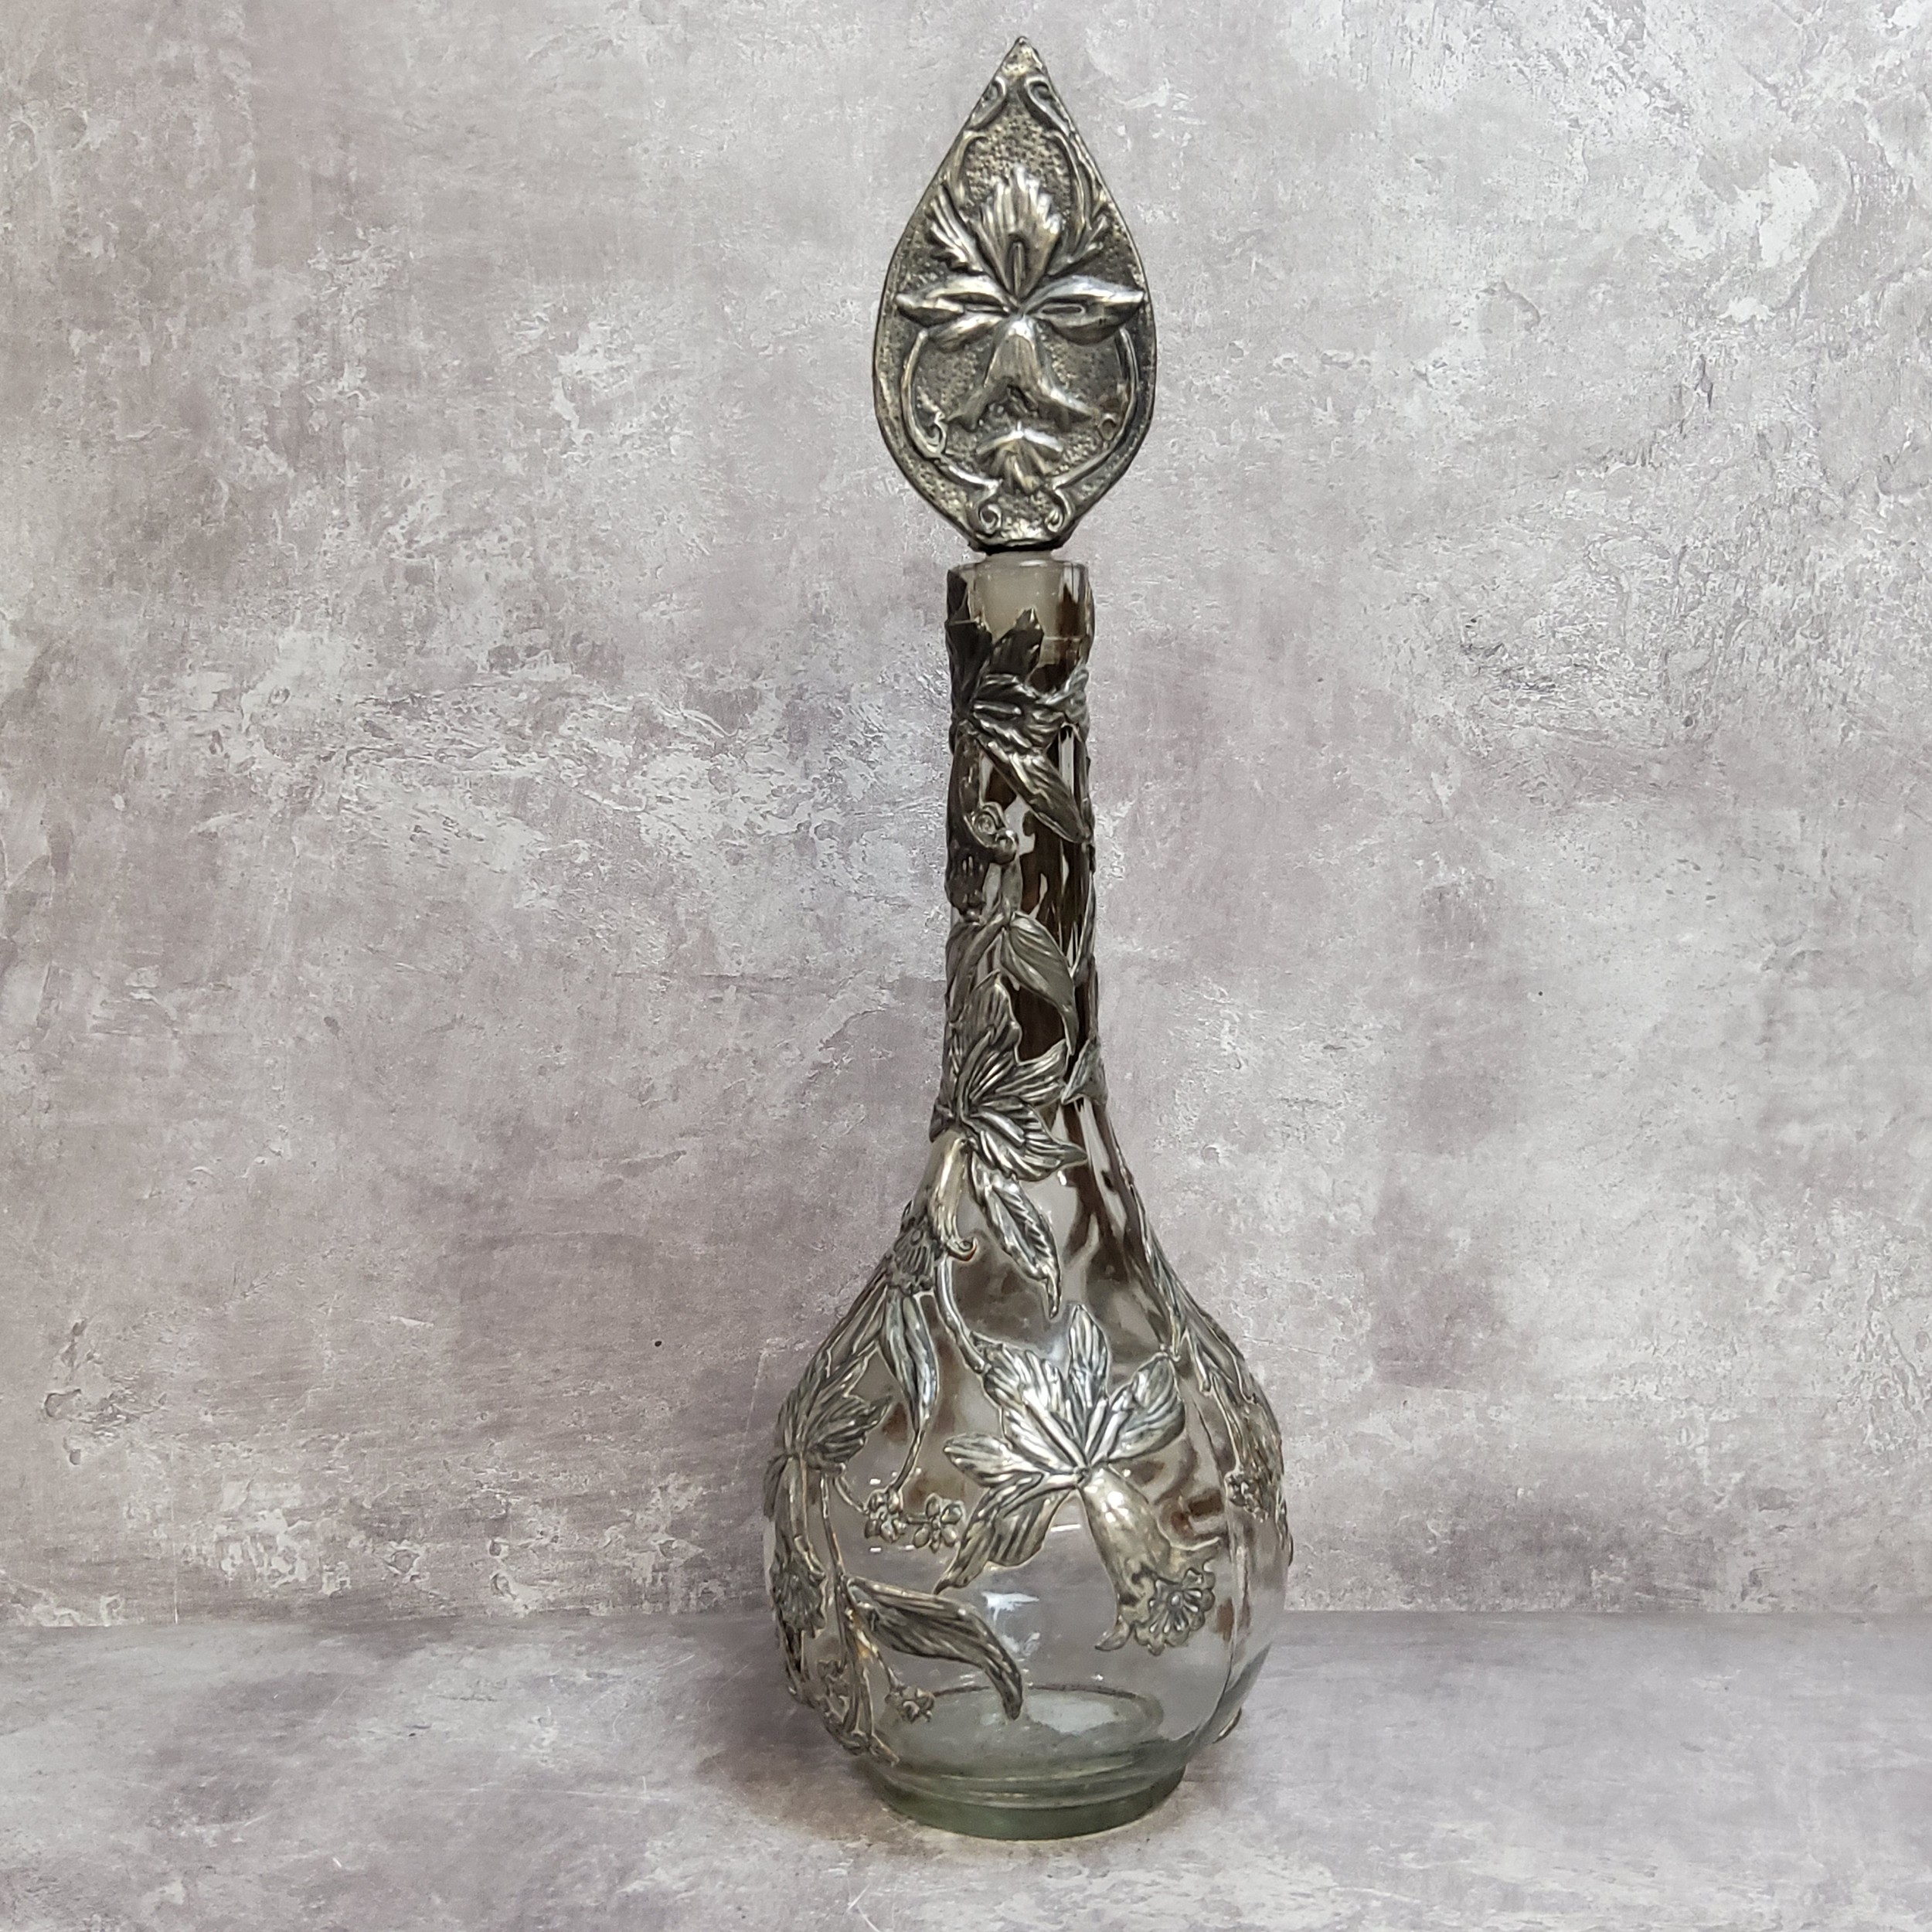 A period Art Nouveau globe and stem shaft vase decorated with sinuous pewter applied reliefwork - Image 2 of 3